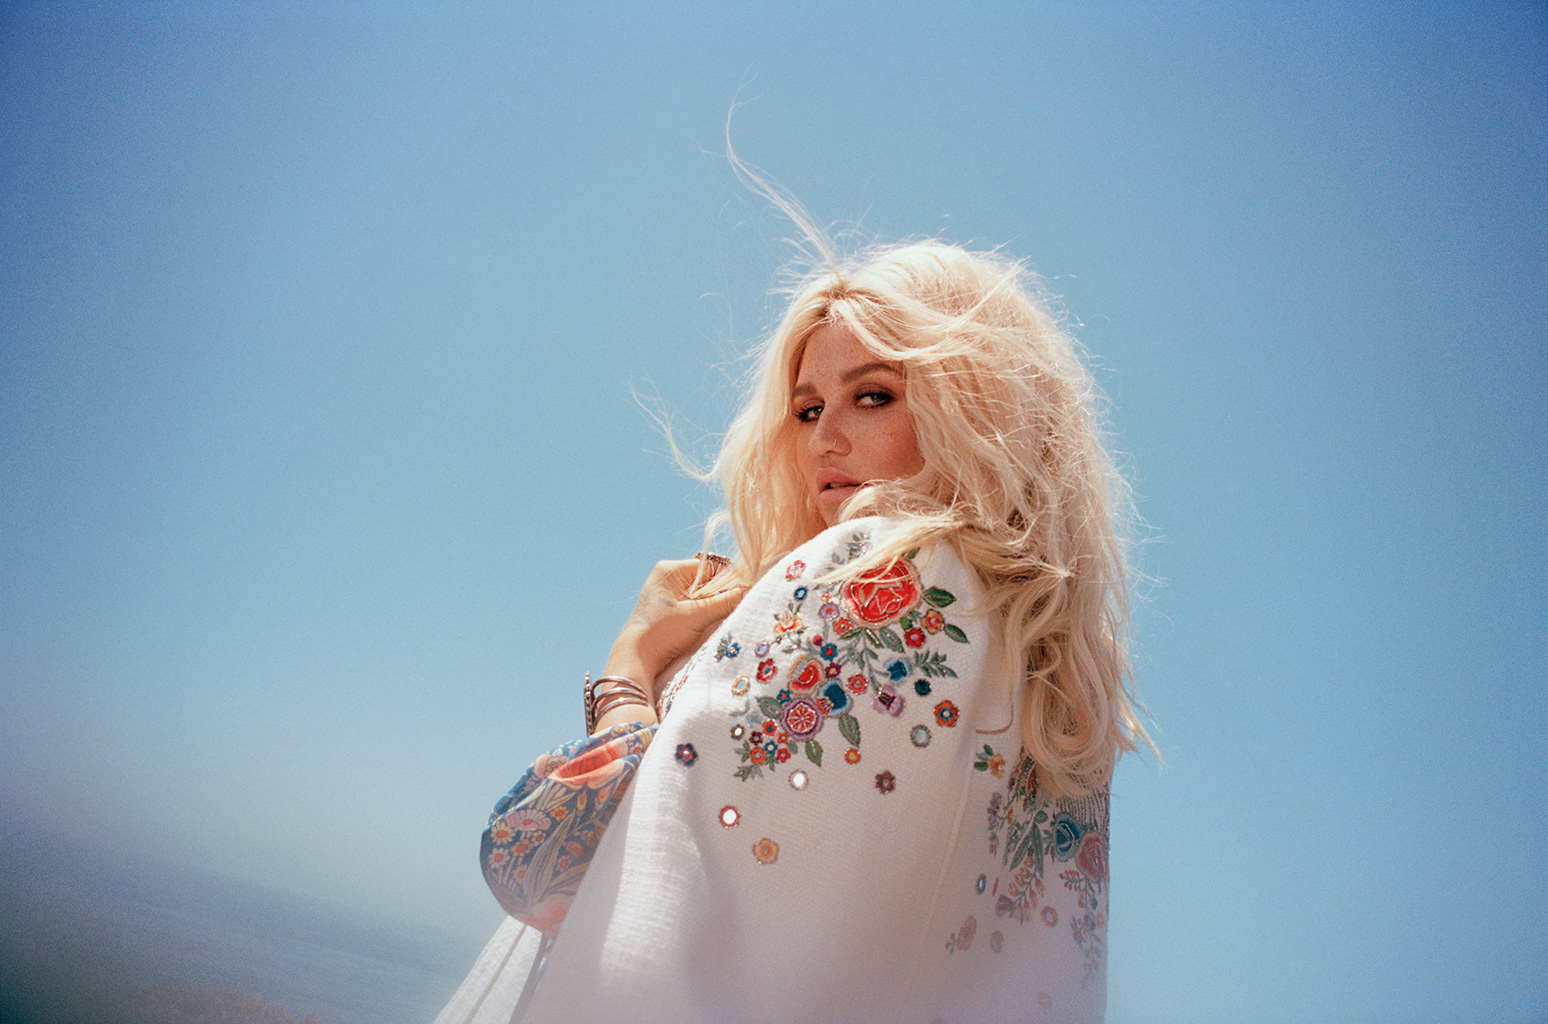 LIVE REVIEW: Kesha rises from the ashes in ‘Rainbow Tour’ debut